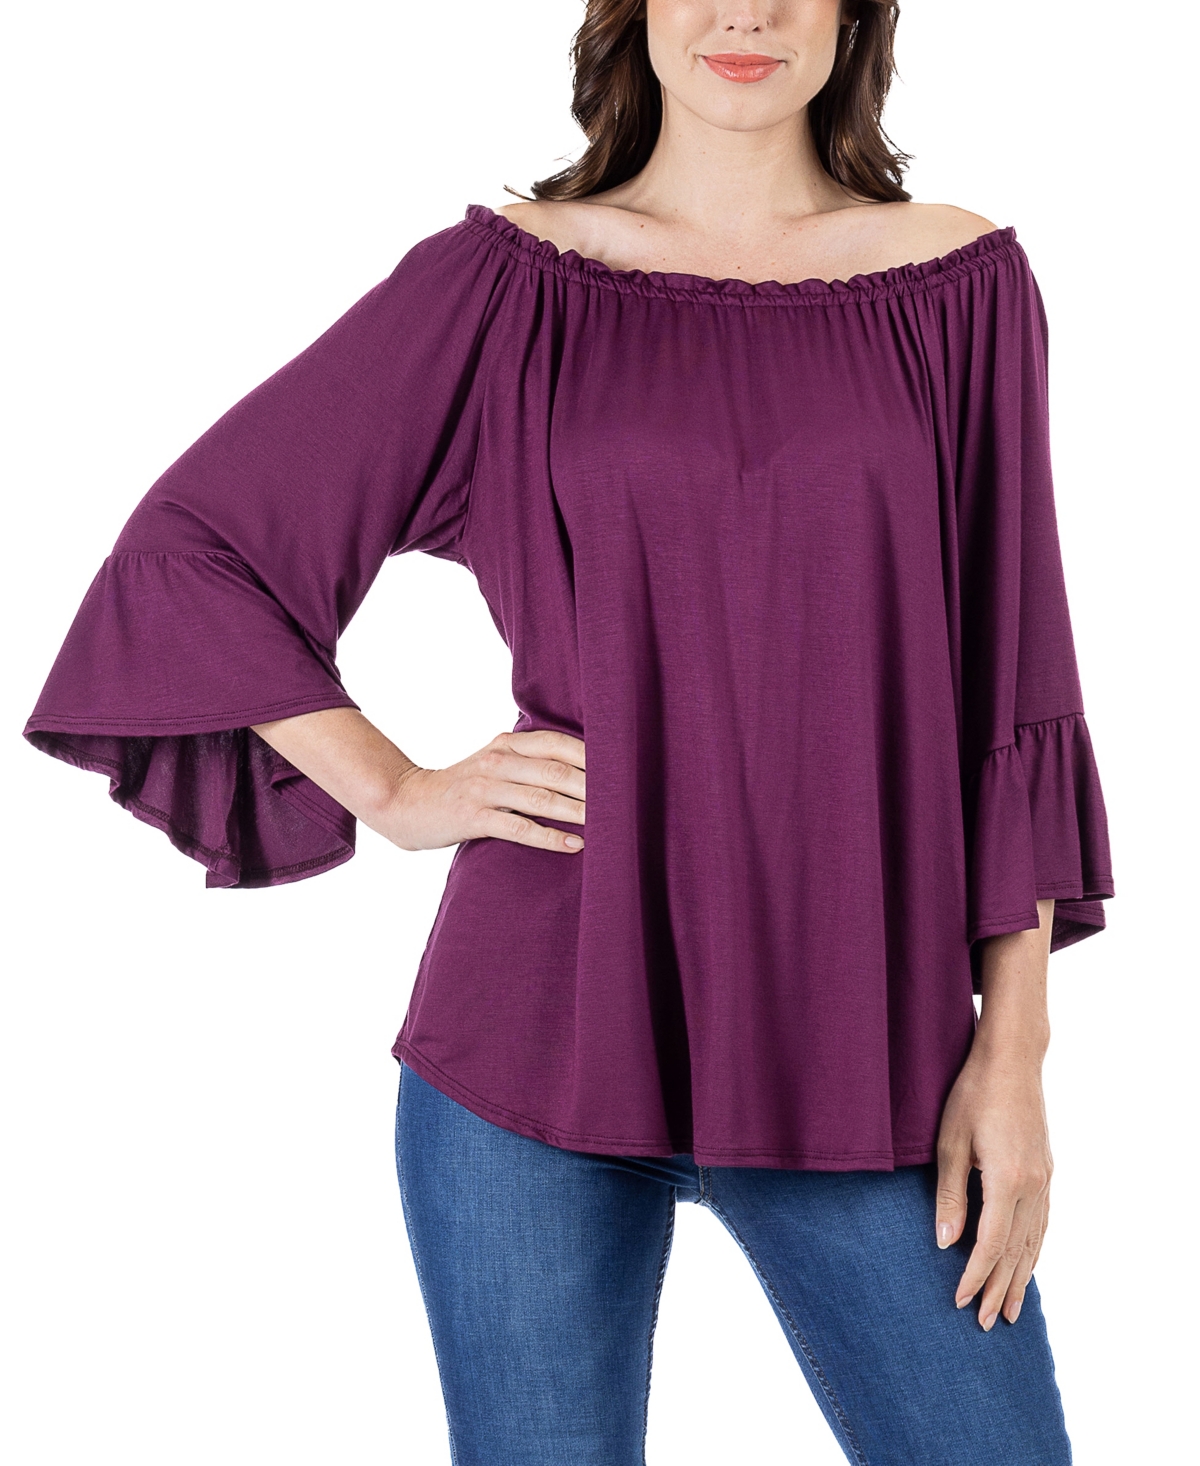 24seven Comfort Apparel Women's Bell Sleeve Loose Fit Tunic Top In Plum